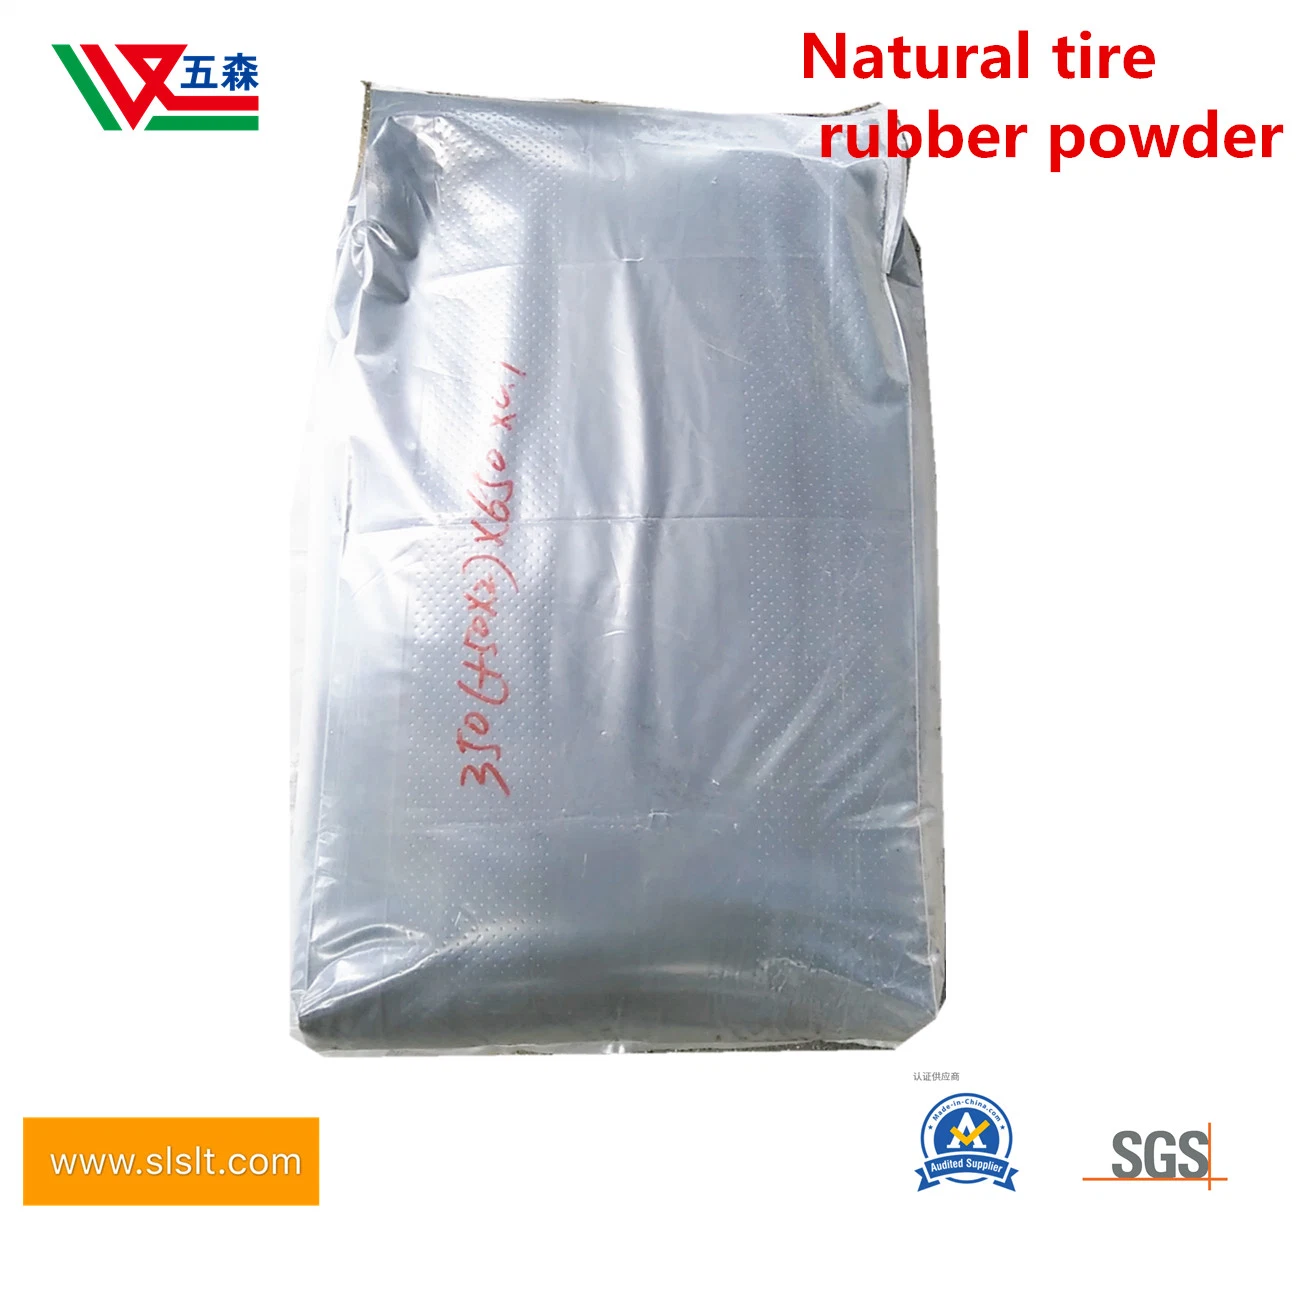 120m Tire Rubber Powder From Chinese Rubber Manufacturers, Special Tire Rubber Powder for Rubber Track, Antiskid and Wear-Resistant Tire Rubber Powder, Tire Rub